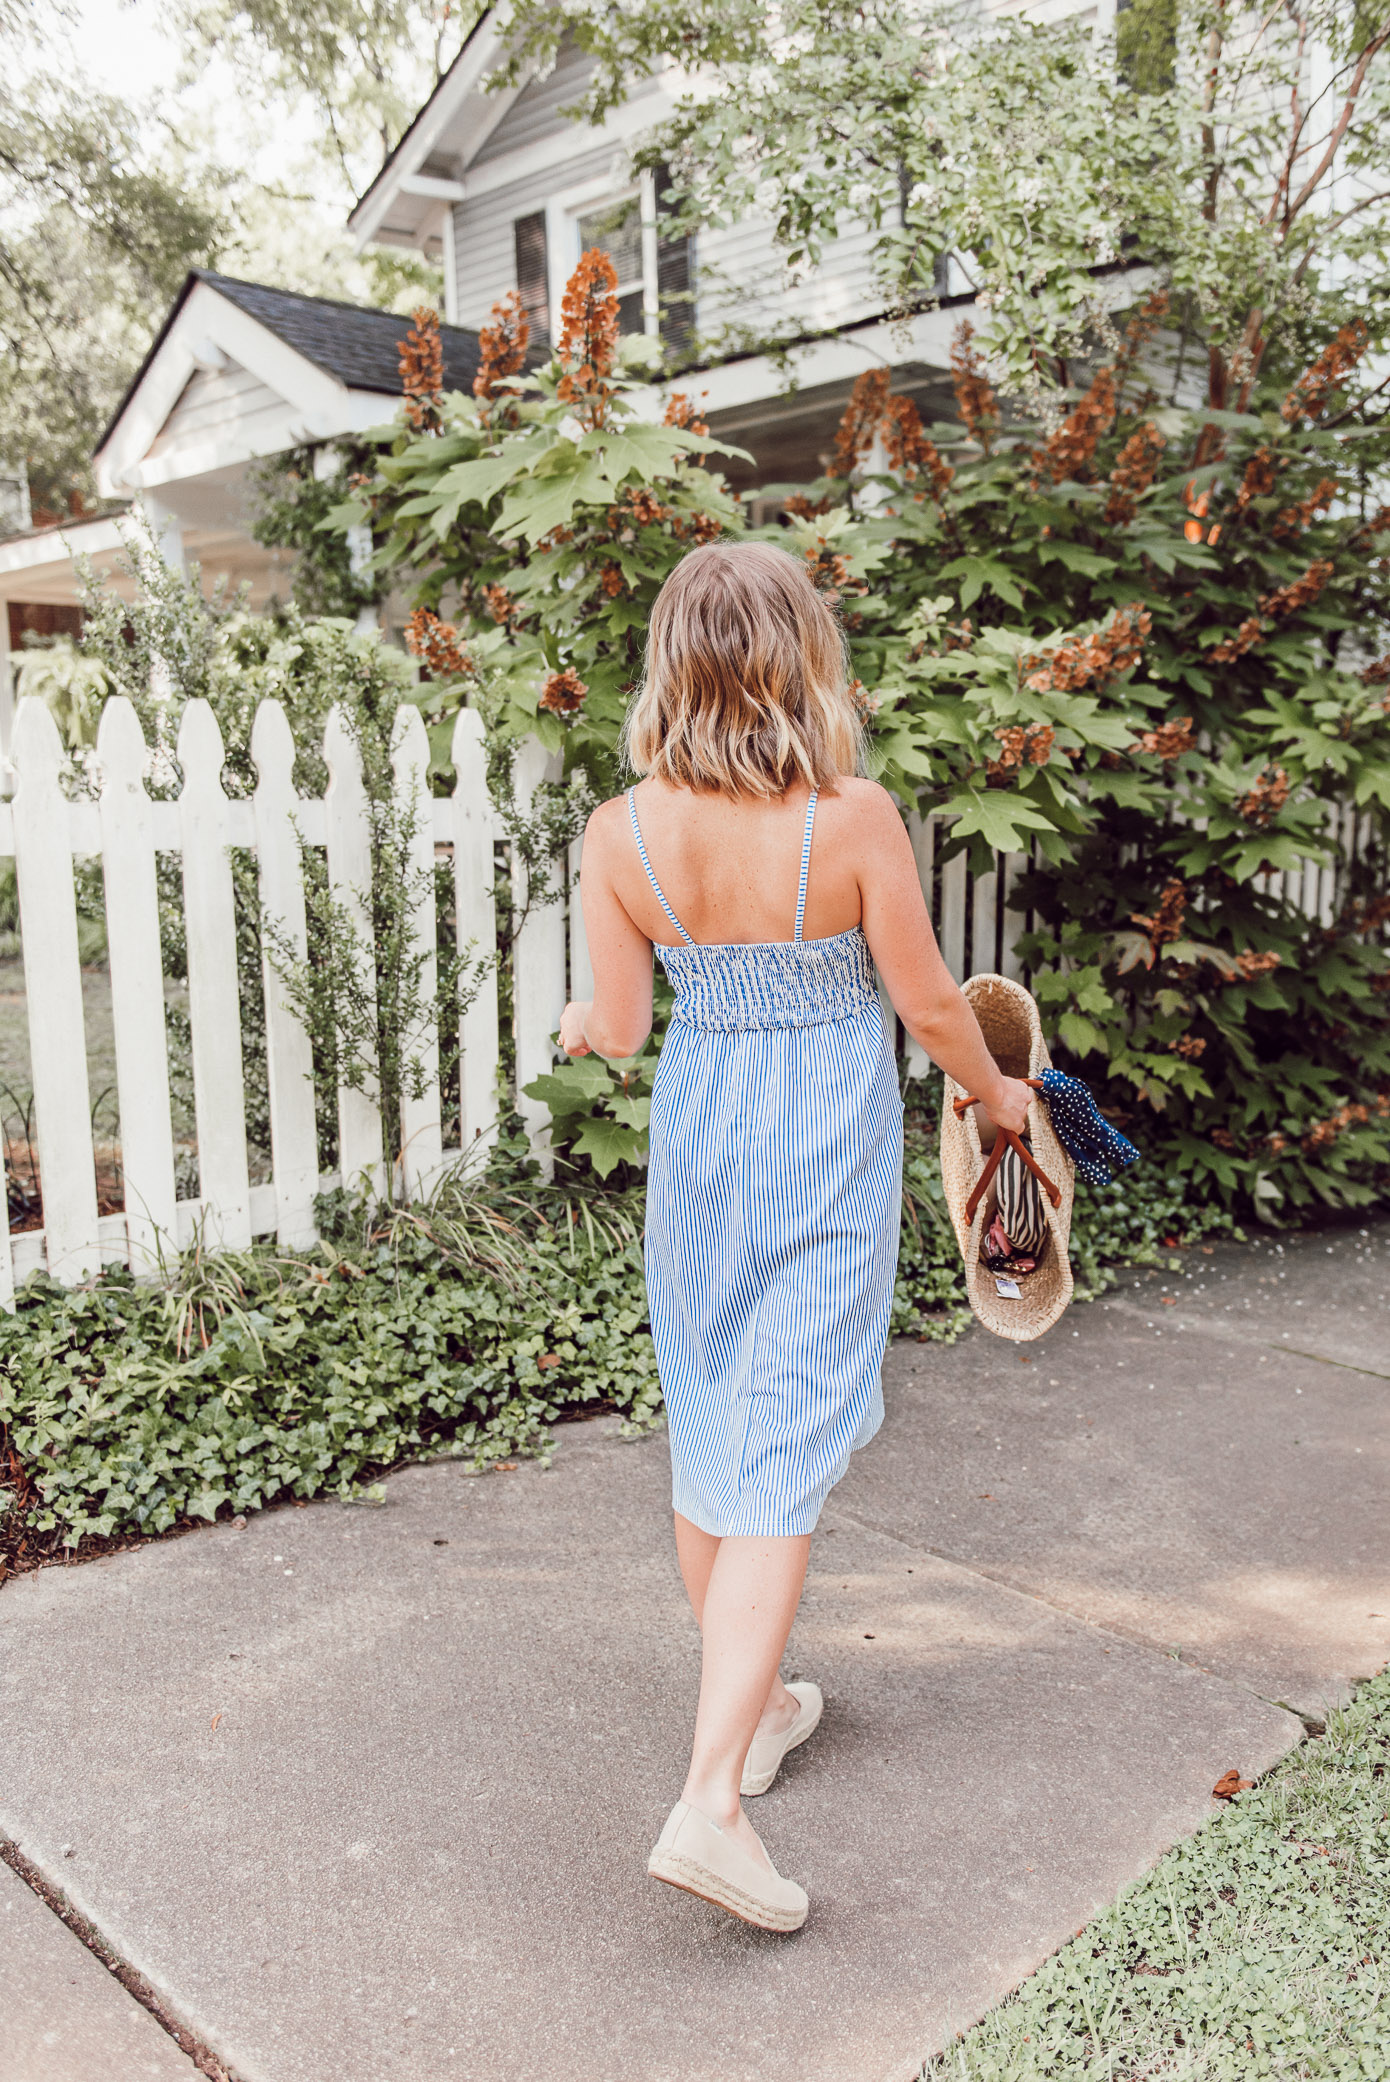 Blue and White Striped Midi Dress, Large Straw Tote, Navy Polka Dot Bandana, Espadrille Loafers | Casual Summer Style | Louella Reese